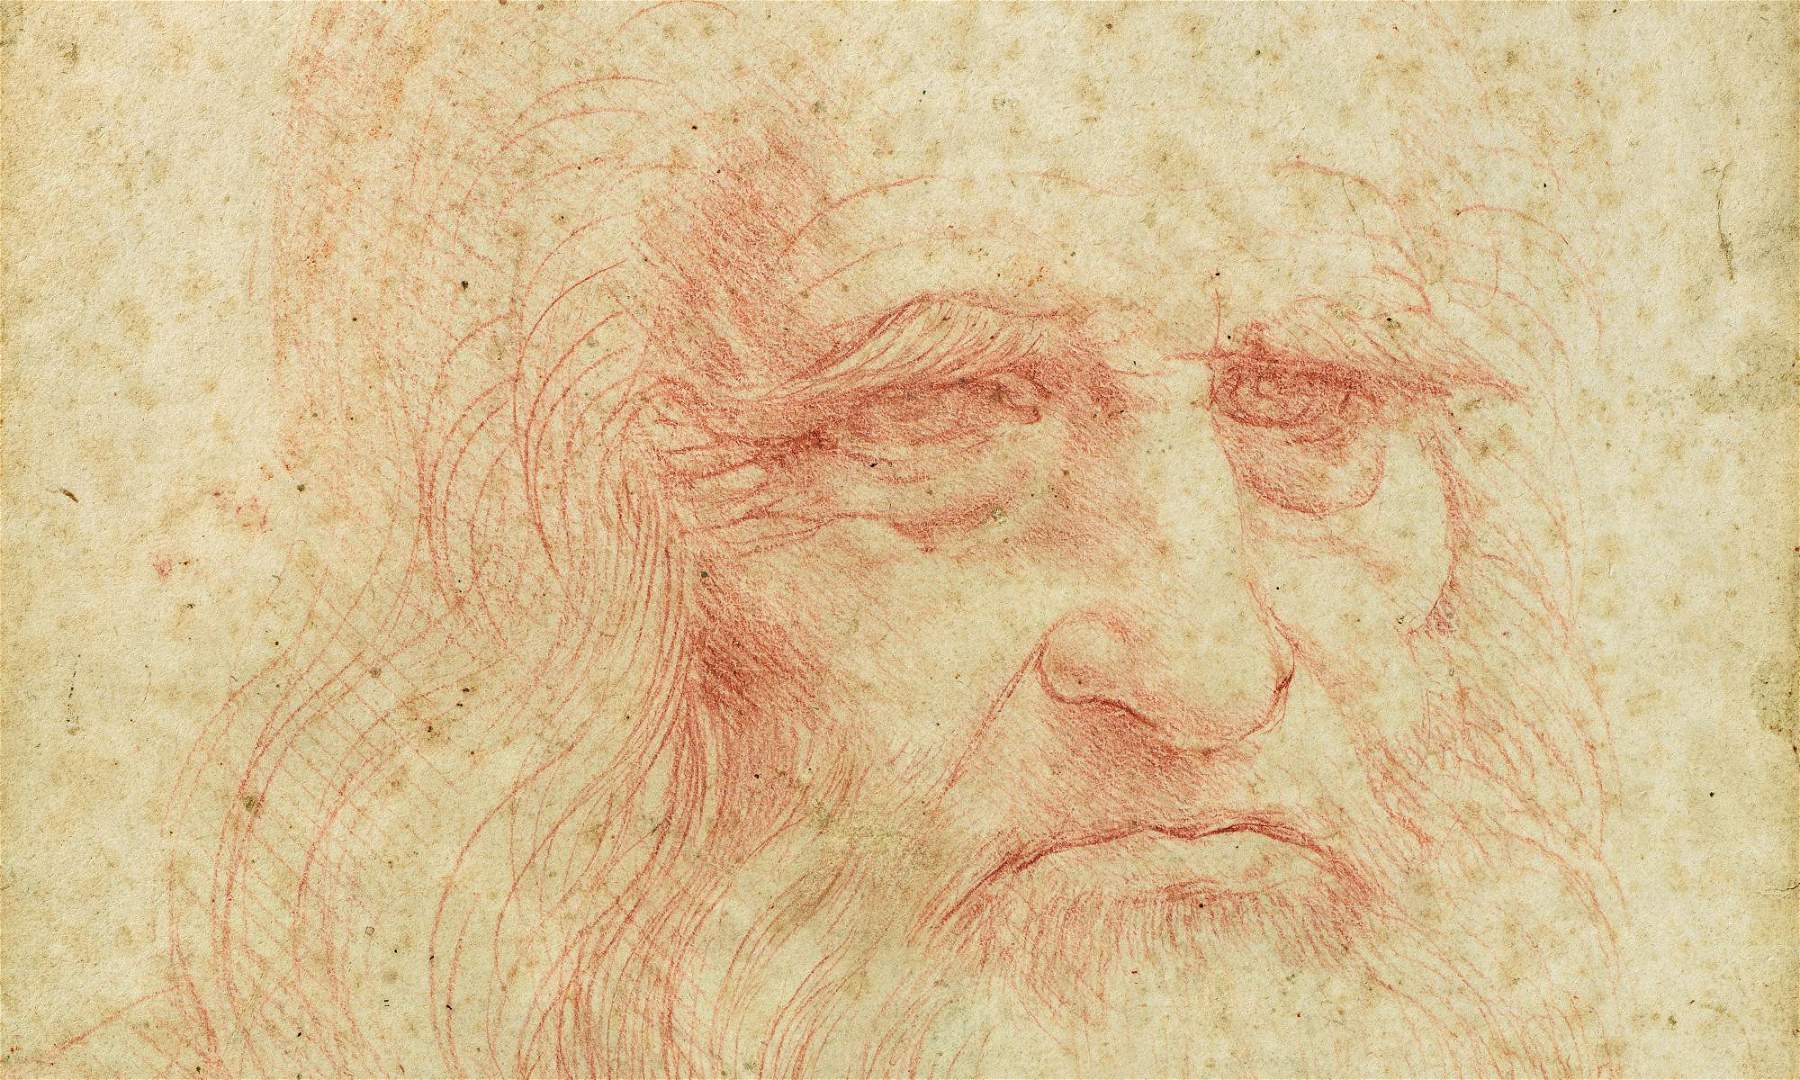 Turin's Royal Museums conclude Leonardo da Vinci celebrations with an exhibition of drawings